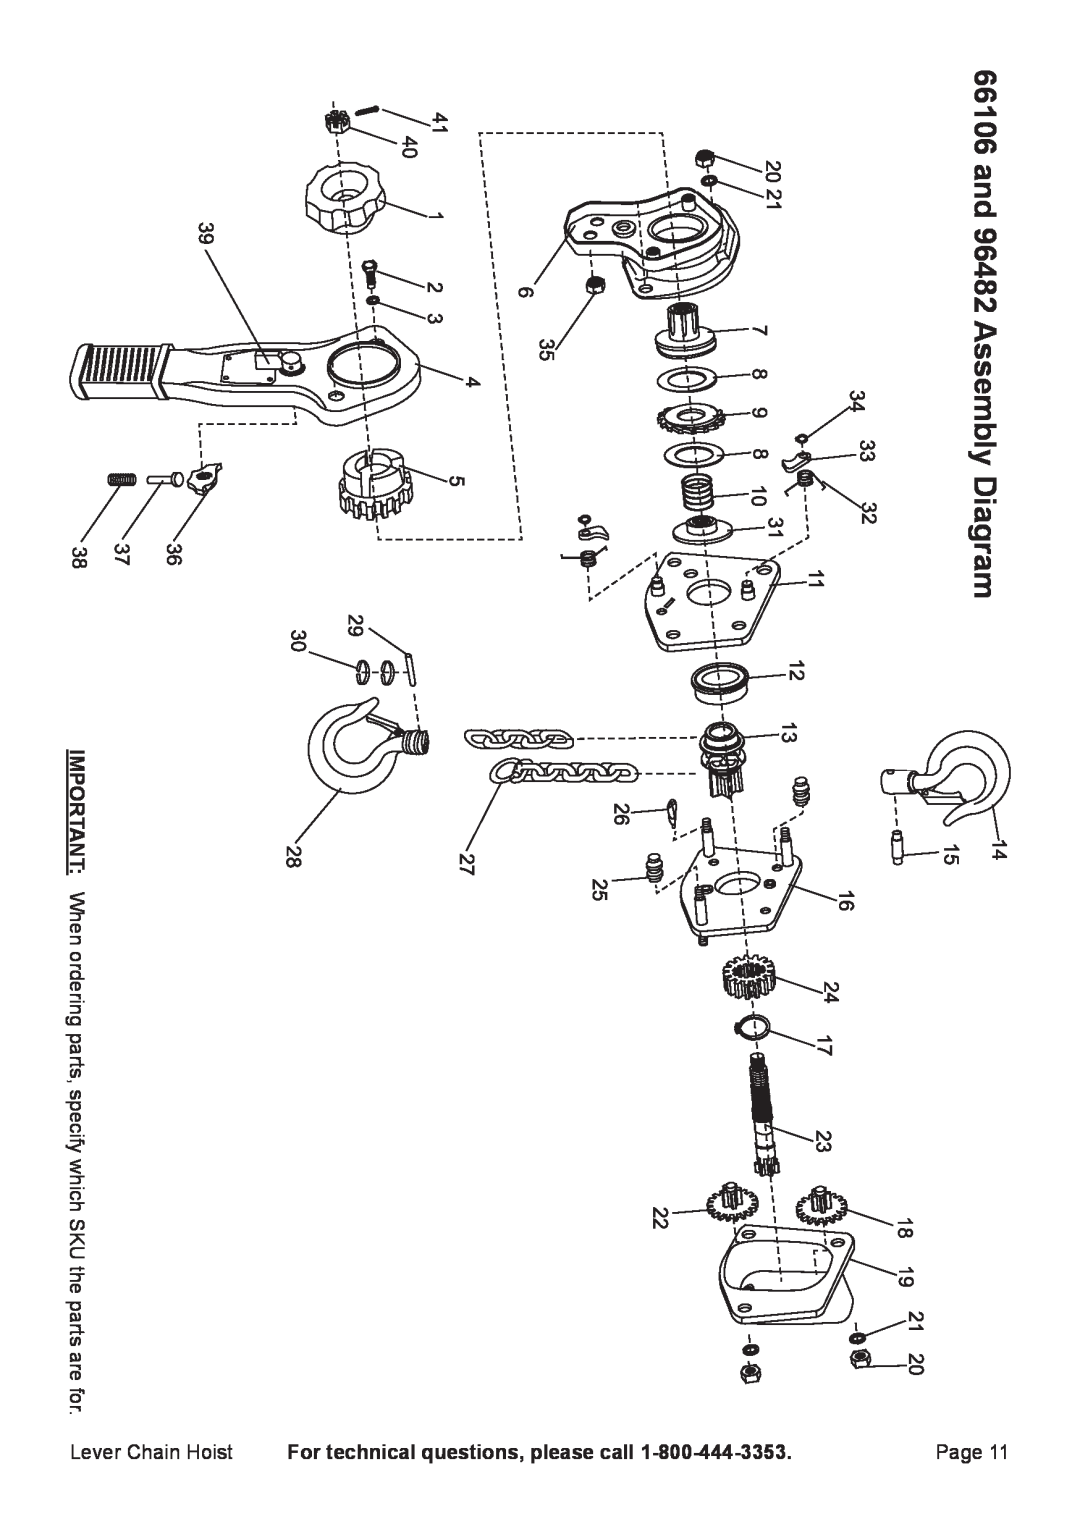 Harbor Freight Tools 69482, 67144, 66106 manual and 96482 Assembly Diagram, For technical questions, please call 